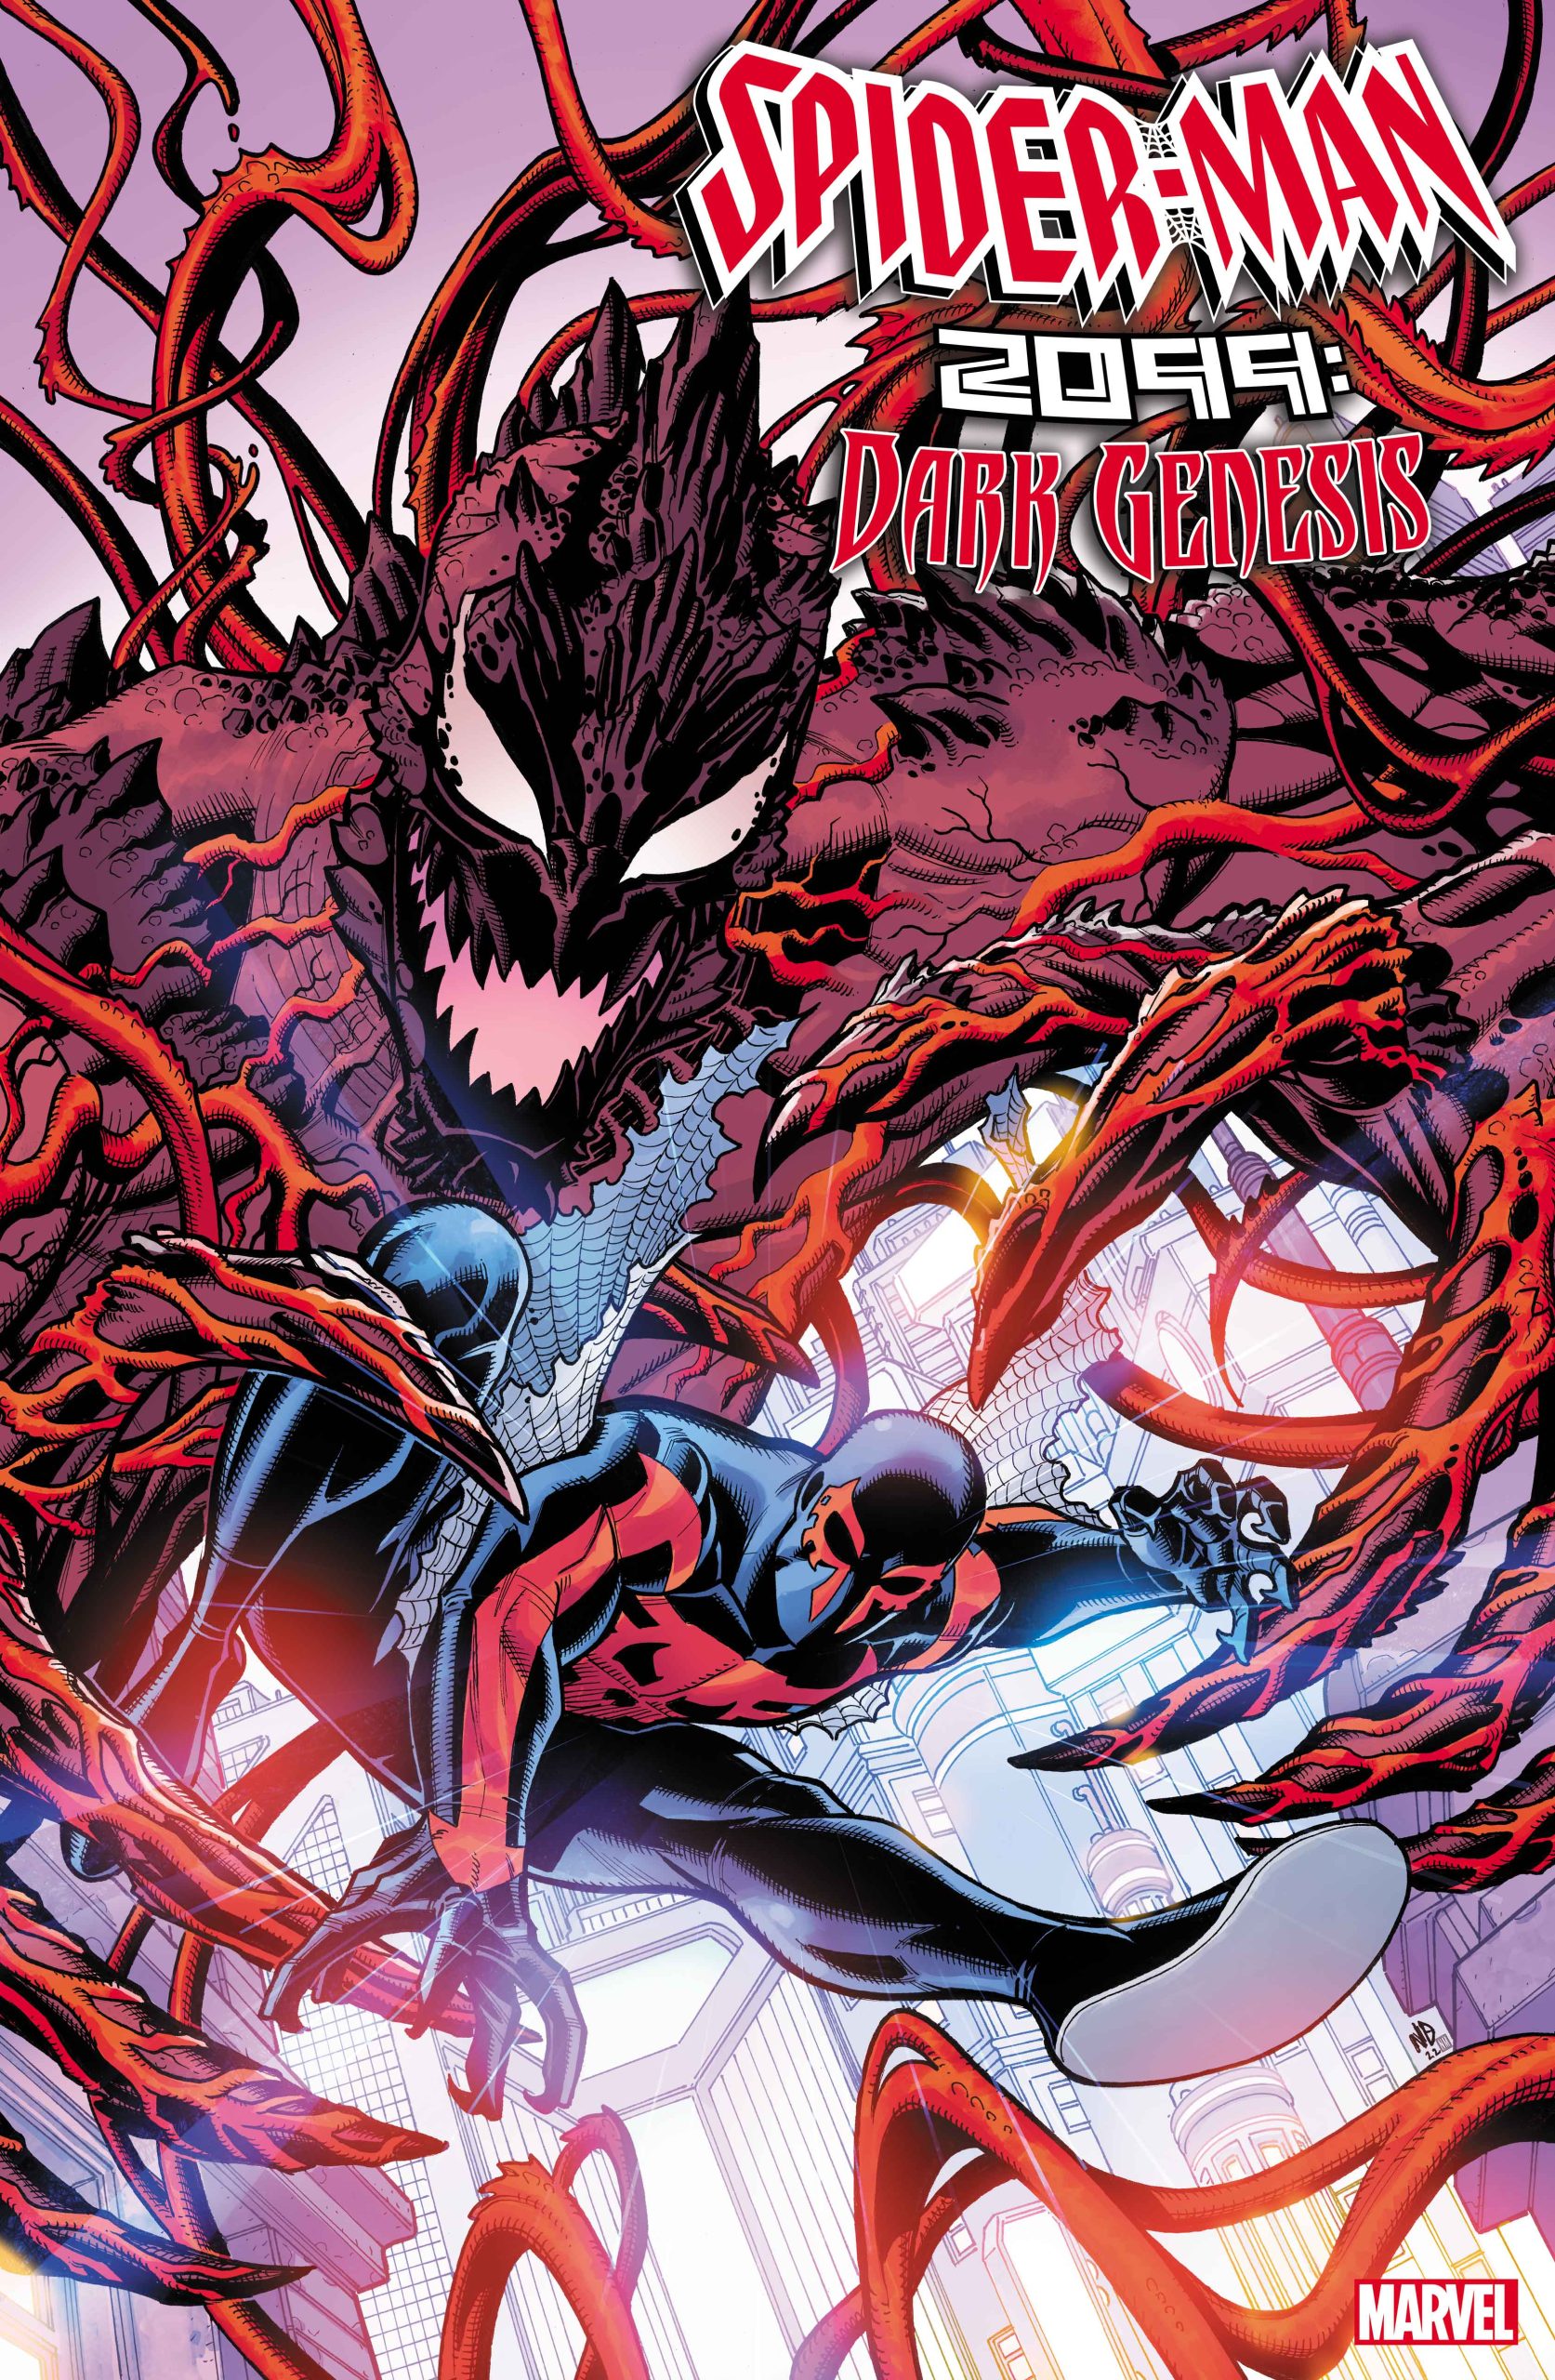 Marvel returning to world of 'Spider-Man 2099' with new series